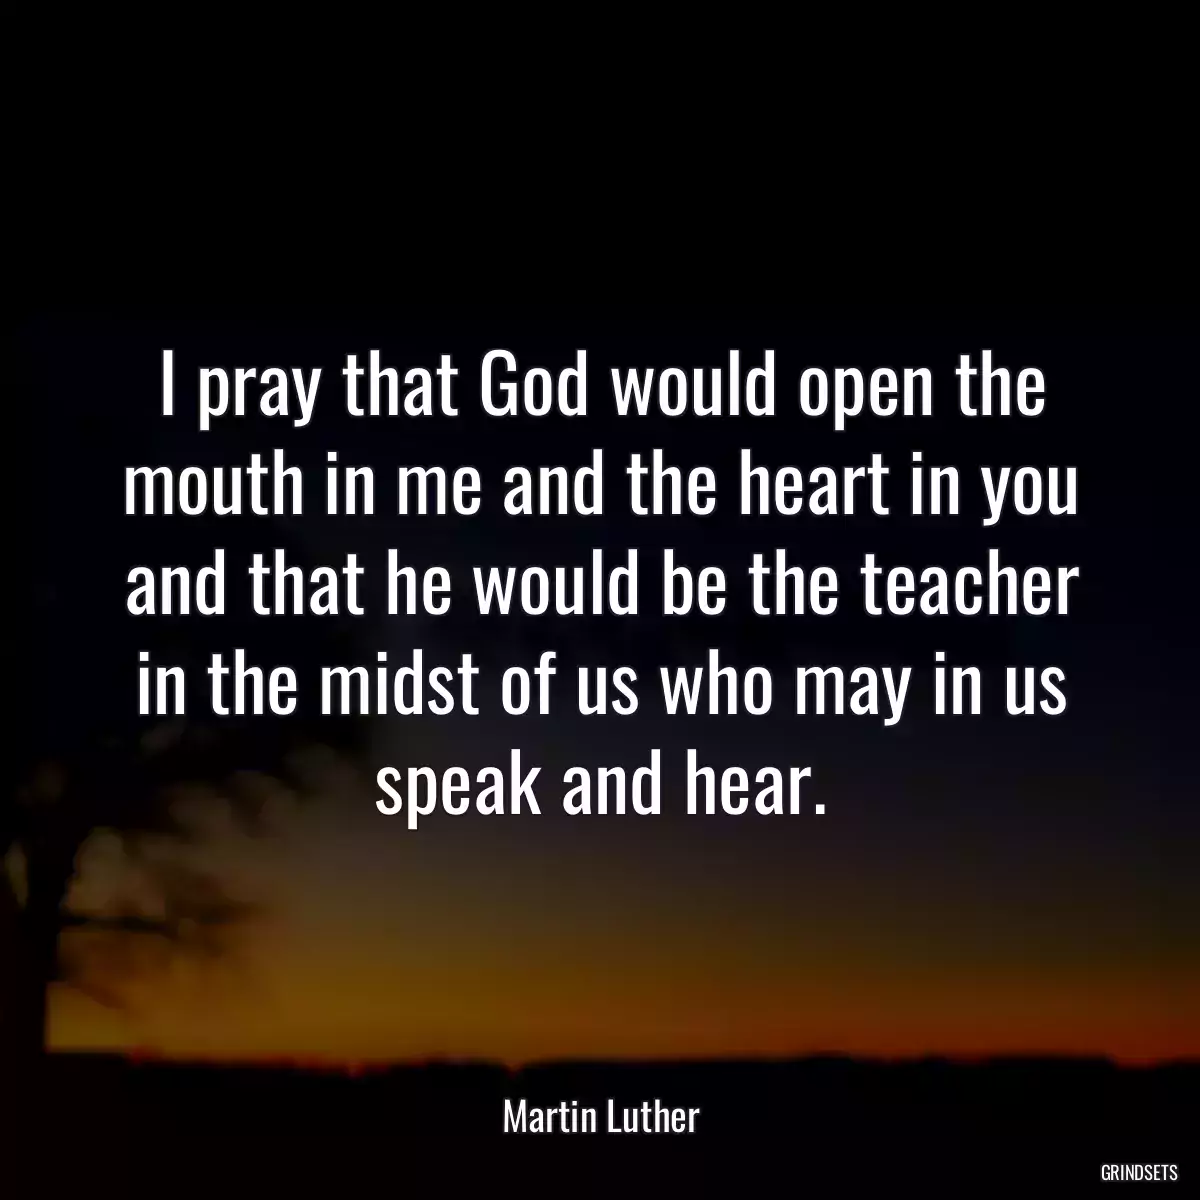 I pray that God would open the mouth in me and the heart in you and that he would be the teacher in the midst of us who may in us speak and hear.